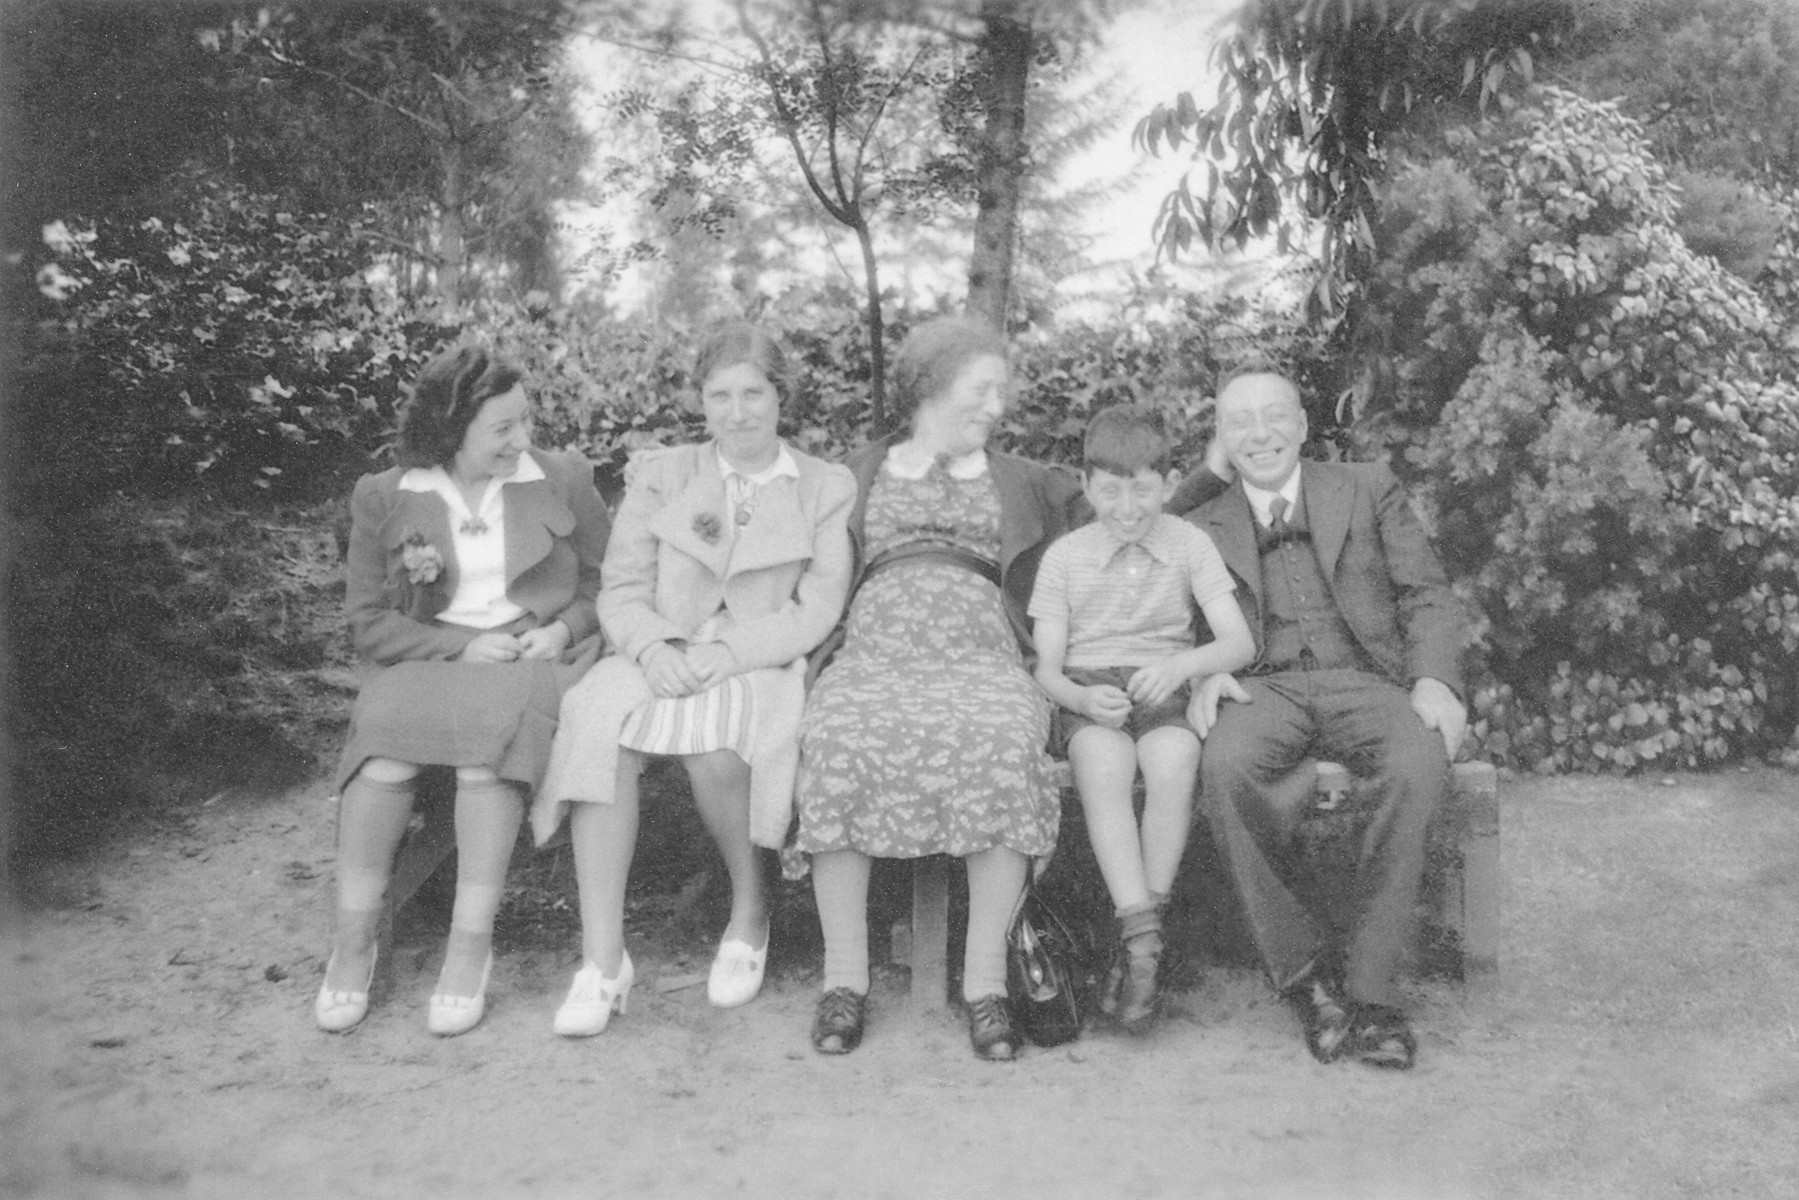 The Moses family poses on a park bench in prewar Netherlands.

Pictured from left to right are Lien Moses (Louis' half-sister), unknown, Froukje Moses, Louis Moses and Simon Moses.